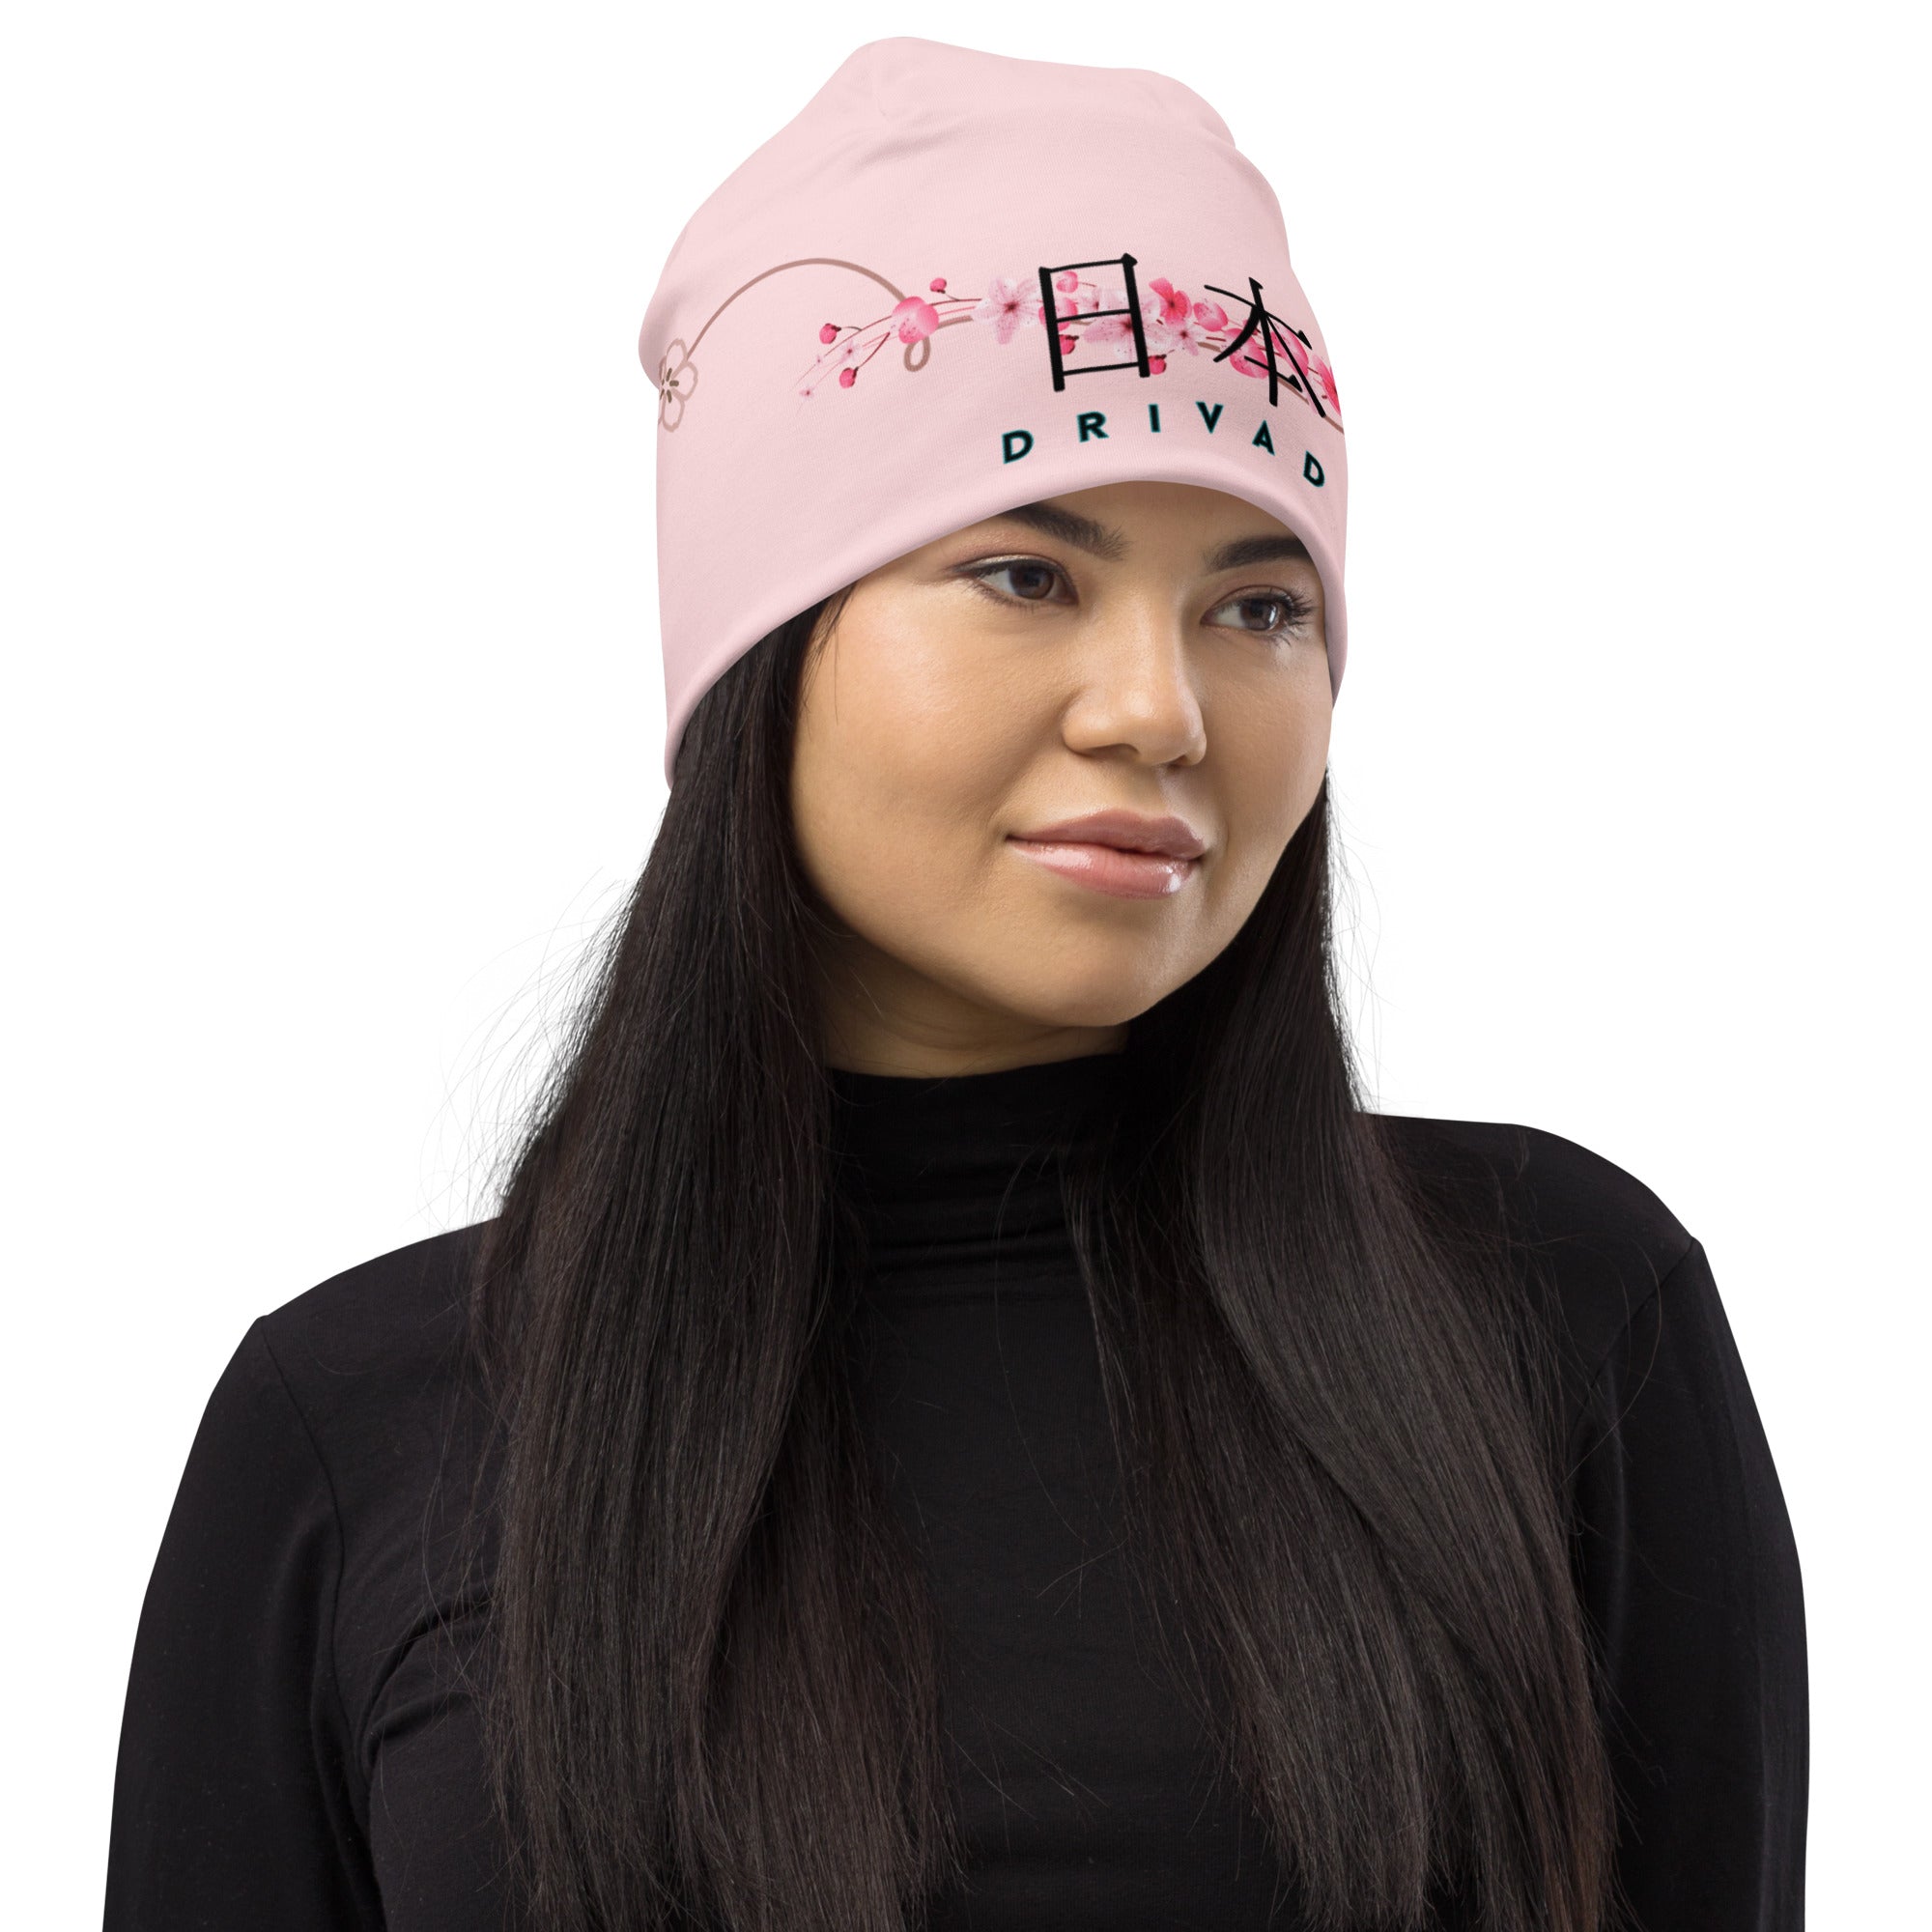 Cherry Blossom Beanie hat - Pink – DRIVADE